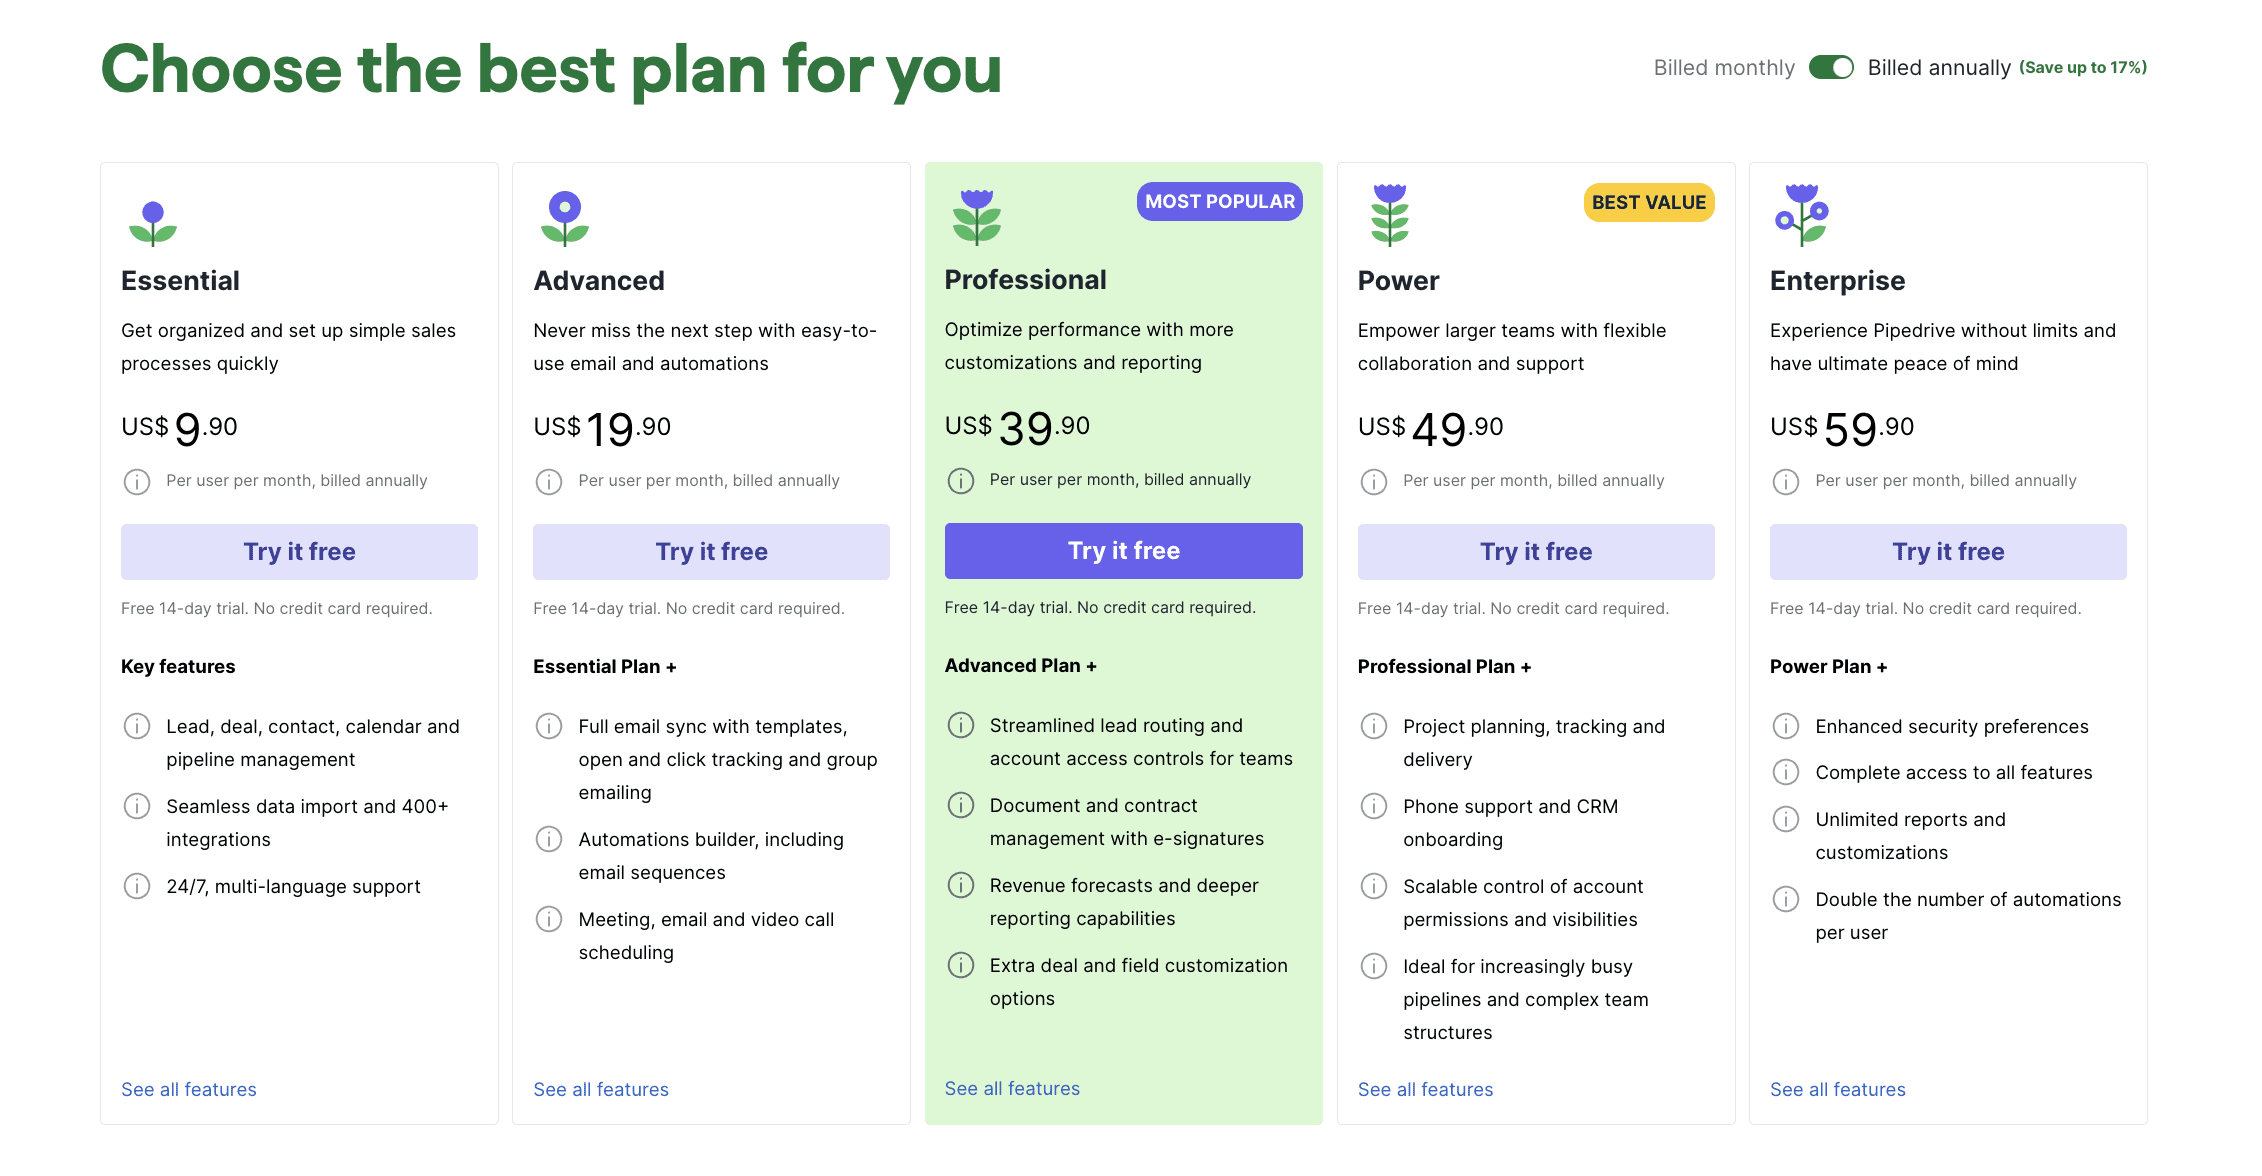 Pipedrive Pricing Page